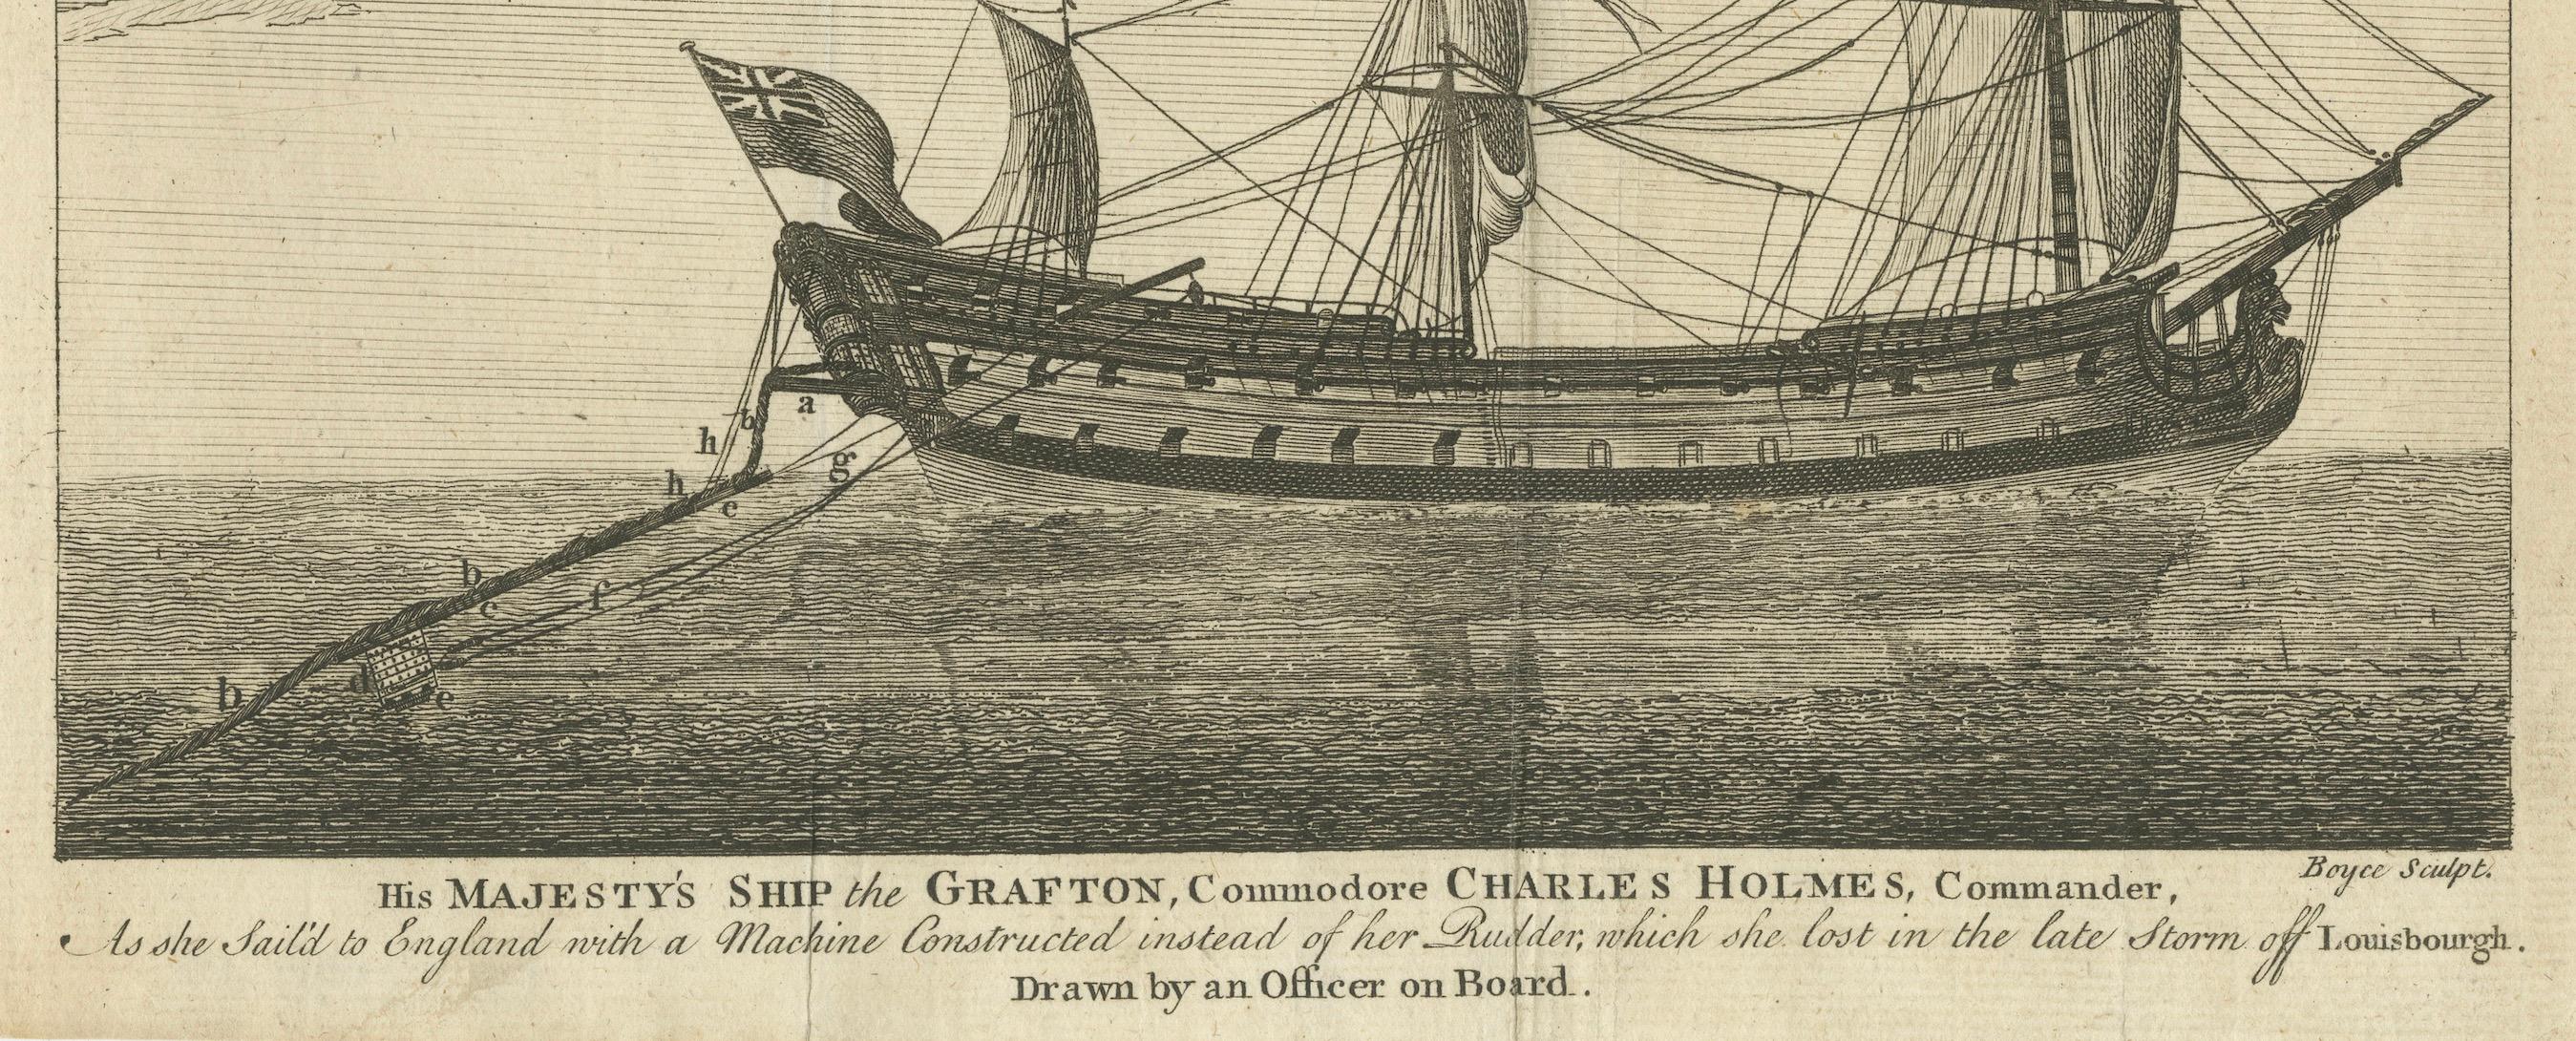 HMS Grafton was a British Royal Navy ship active during the 18th century. The ship’s history is part of the broader narrative of British naval operations during a period marked by colonial expansion, exploration, and frequent maritime conflicts,